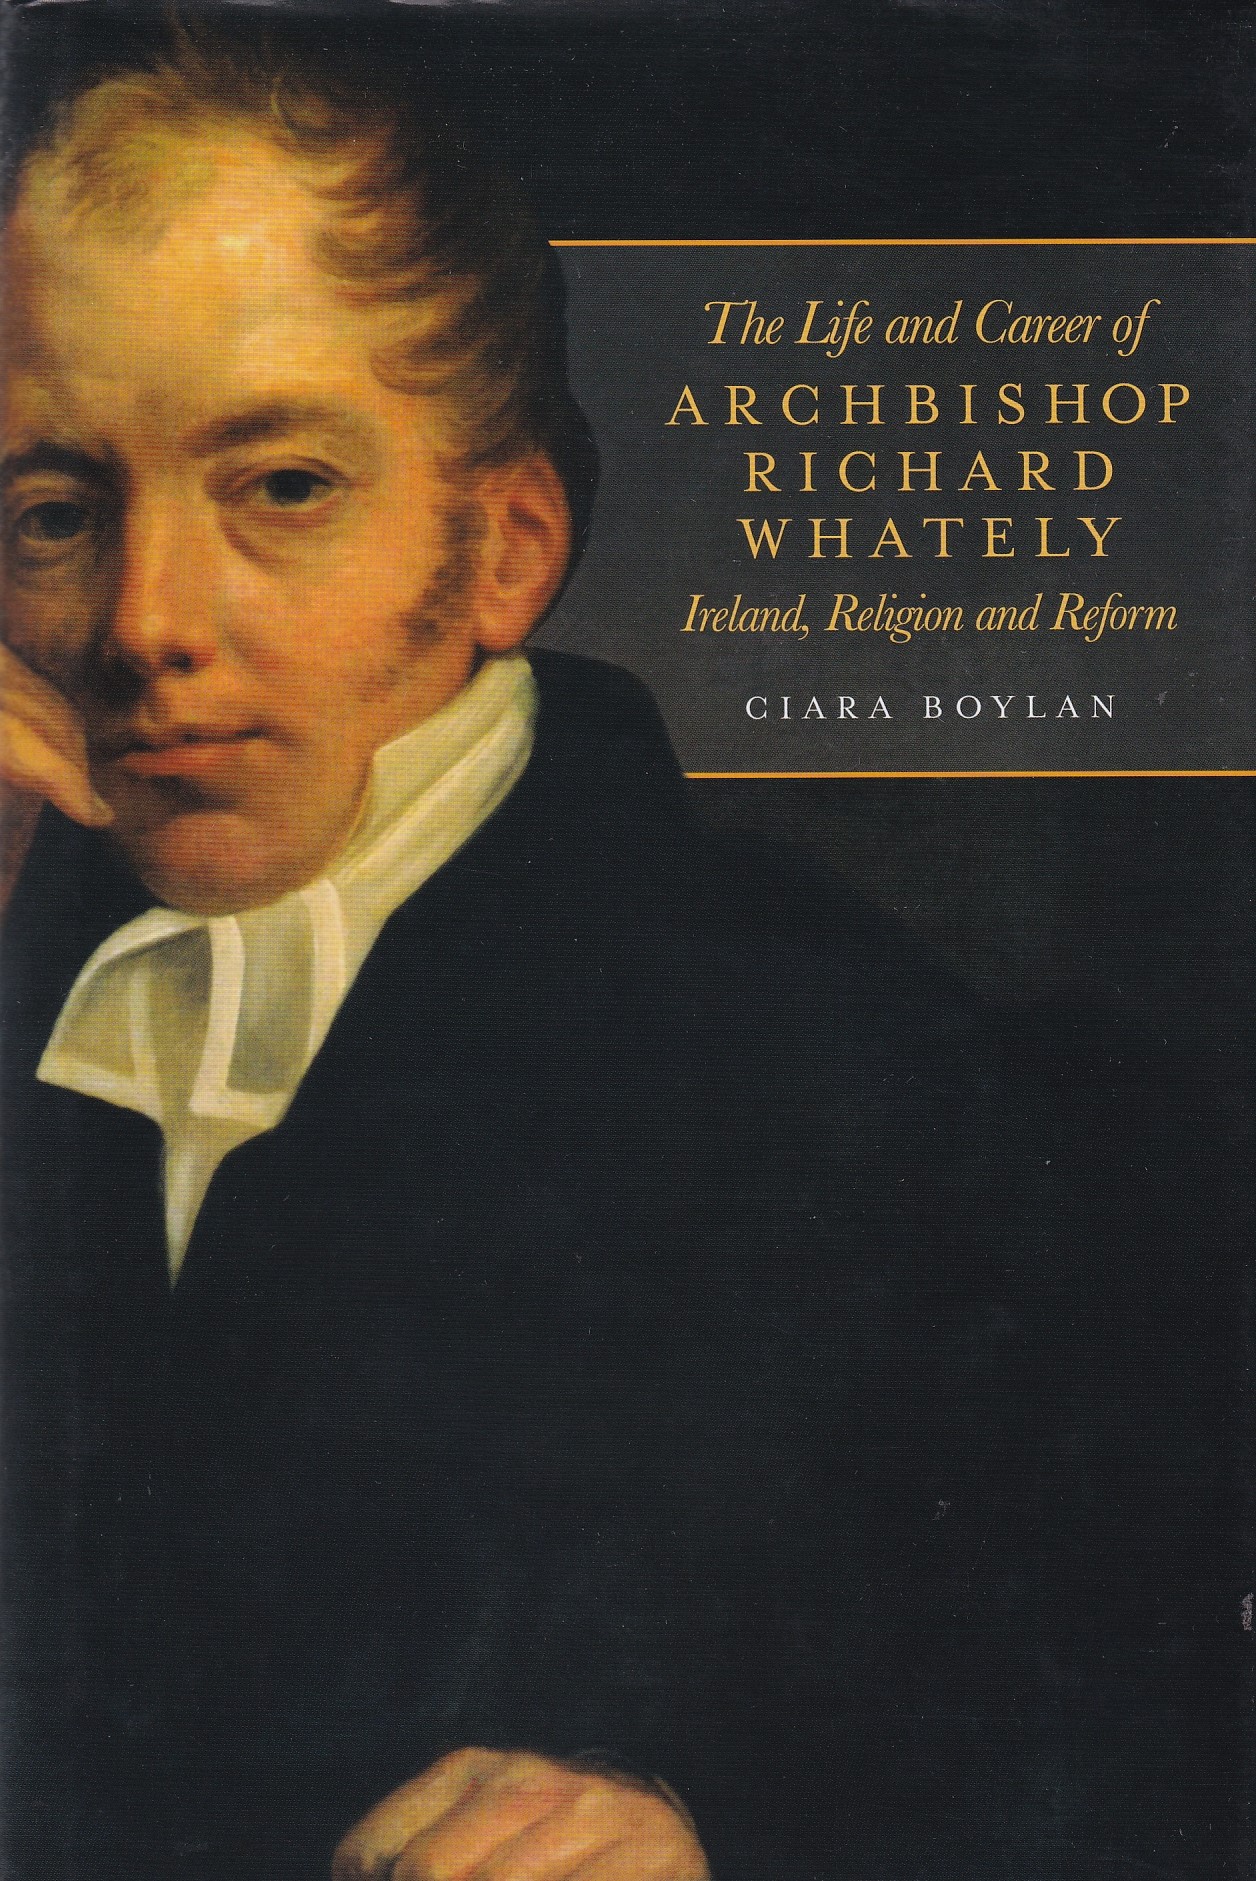 The Life and Career of Archbishop Richard Whately: Ireland, Religion and Reform by Ciara Boylan